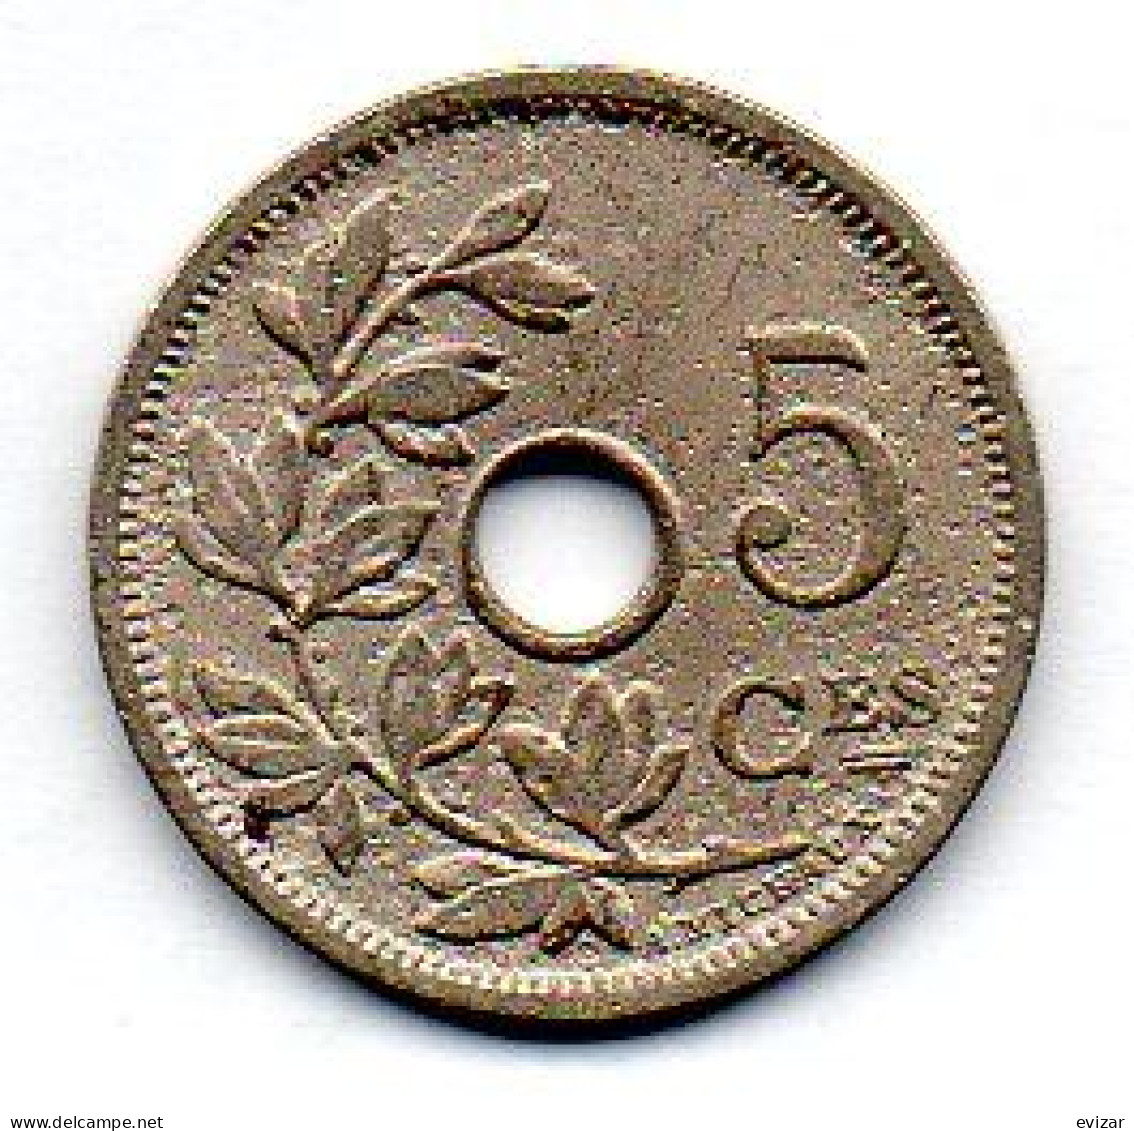 BELGIUM, 5 Centimes, Copper-Nickel, Year 1902, KM # 46, French Legend - 5 Cent